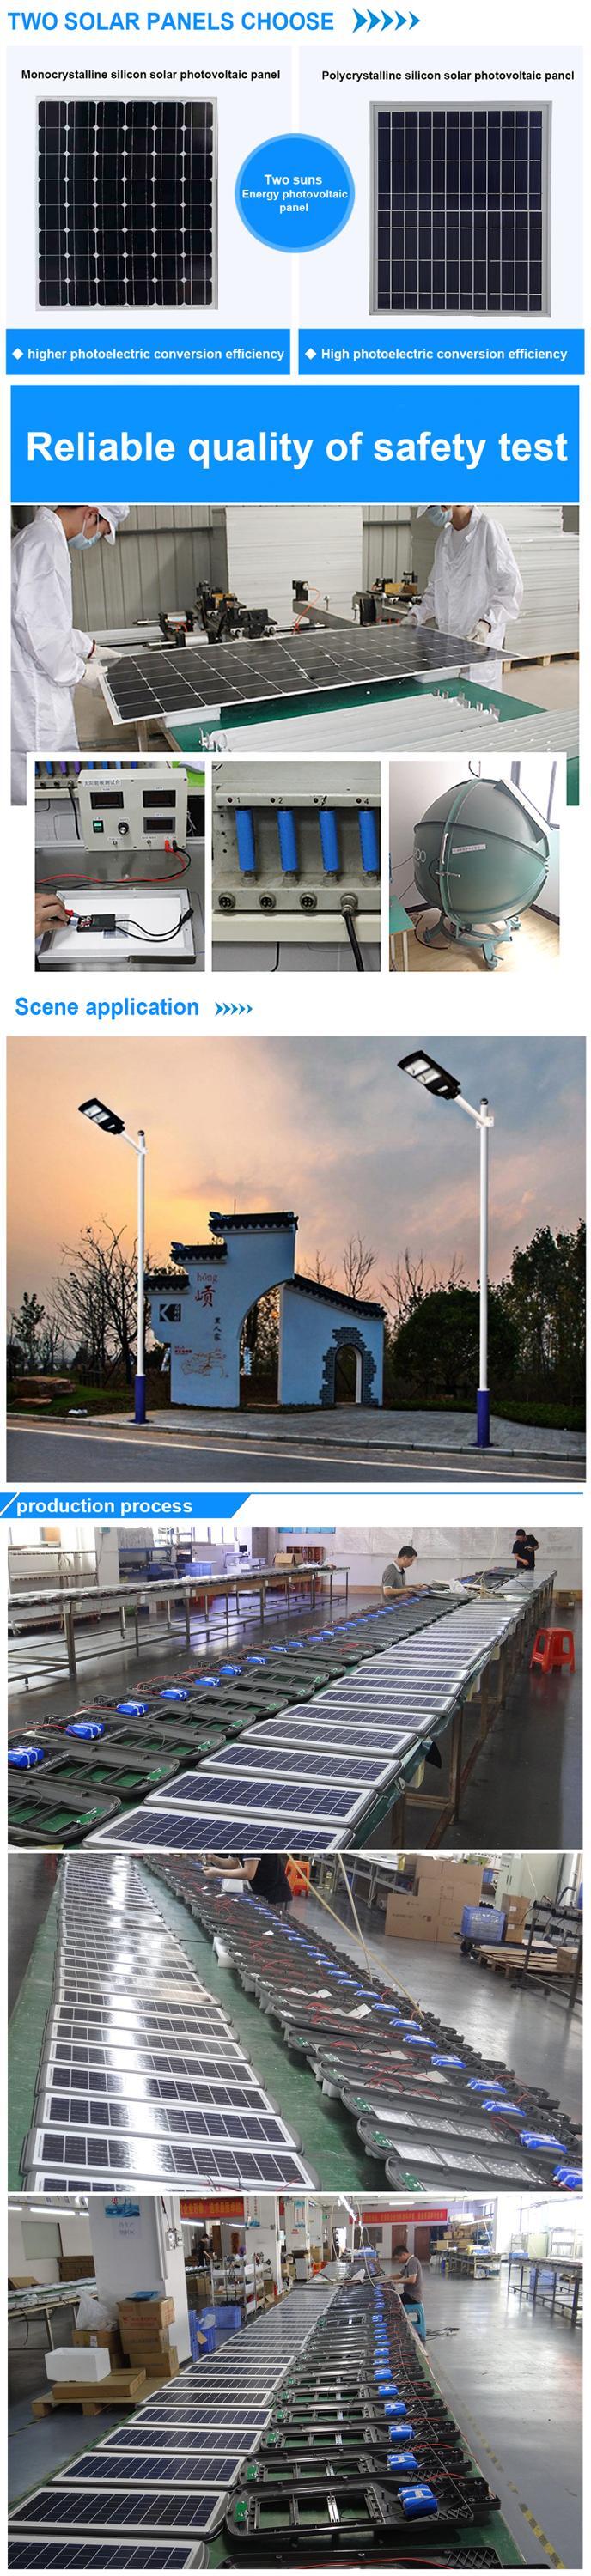 cheap houses price outdoor lamp suppliers power panel cells charger saving lamp IP66 led solar energy systems led street light